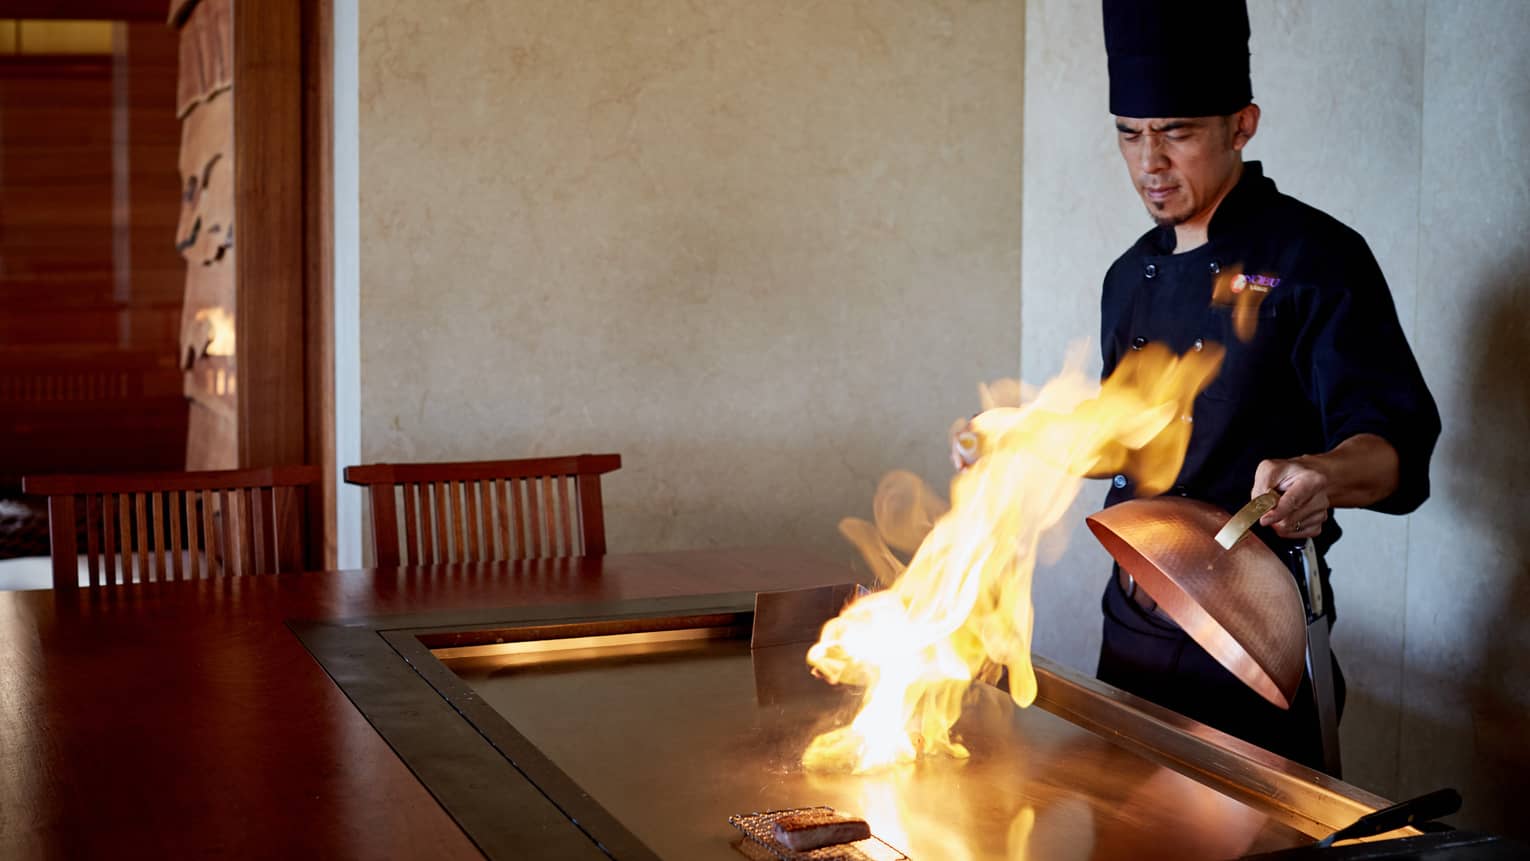 Flames shoot up from grill as NOBU restaurant chef pulls back copper lid